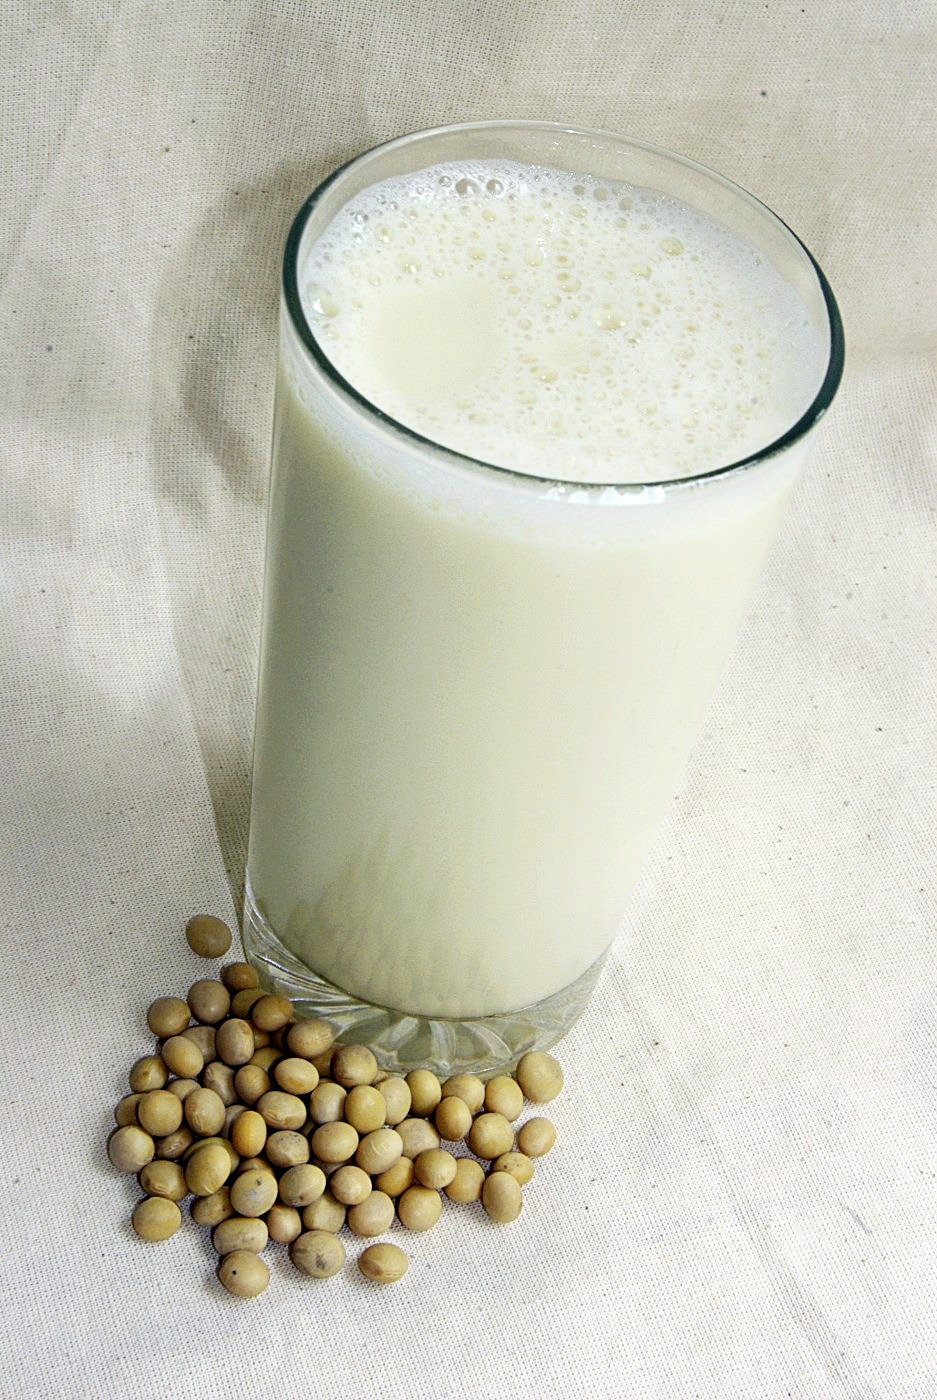 Soy Milk, Uses and Its Benefits